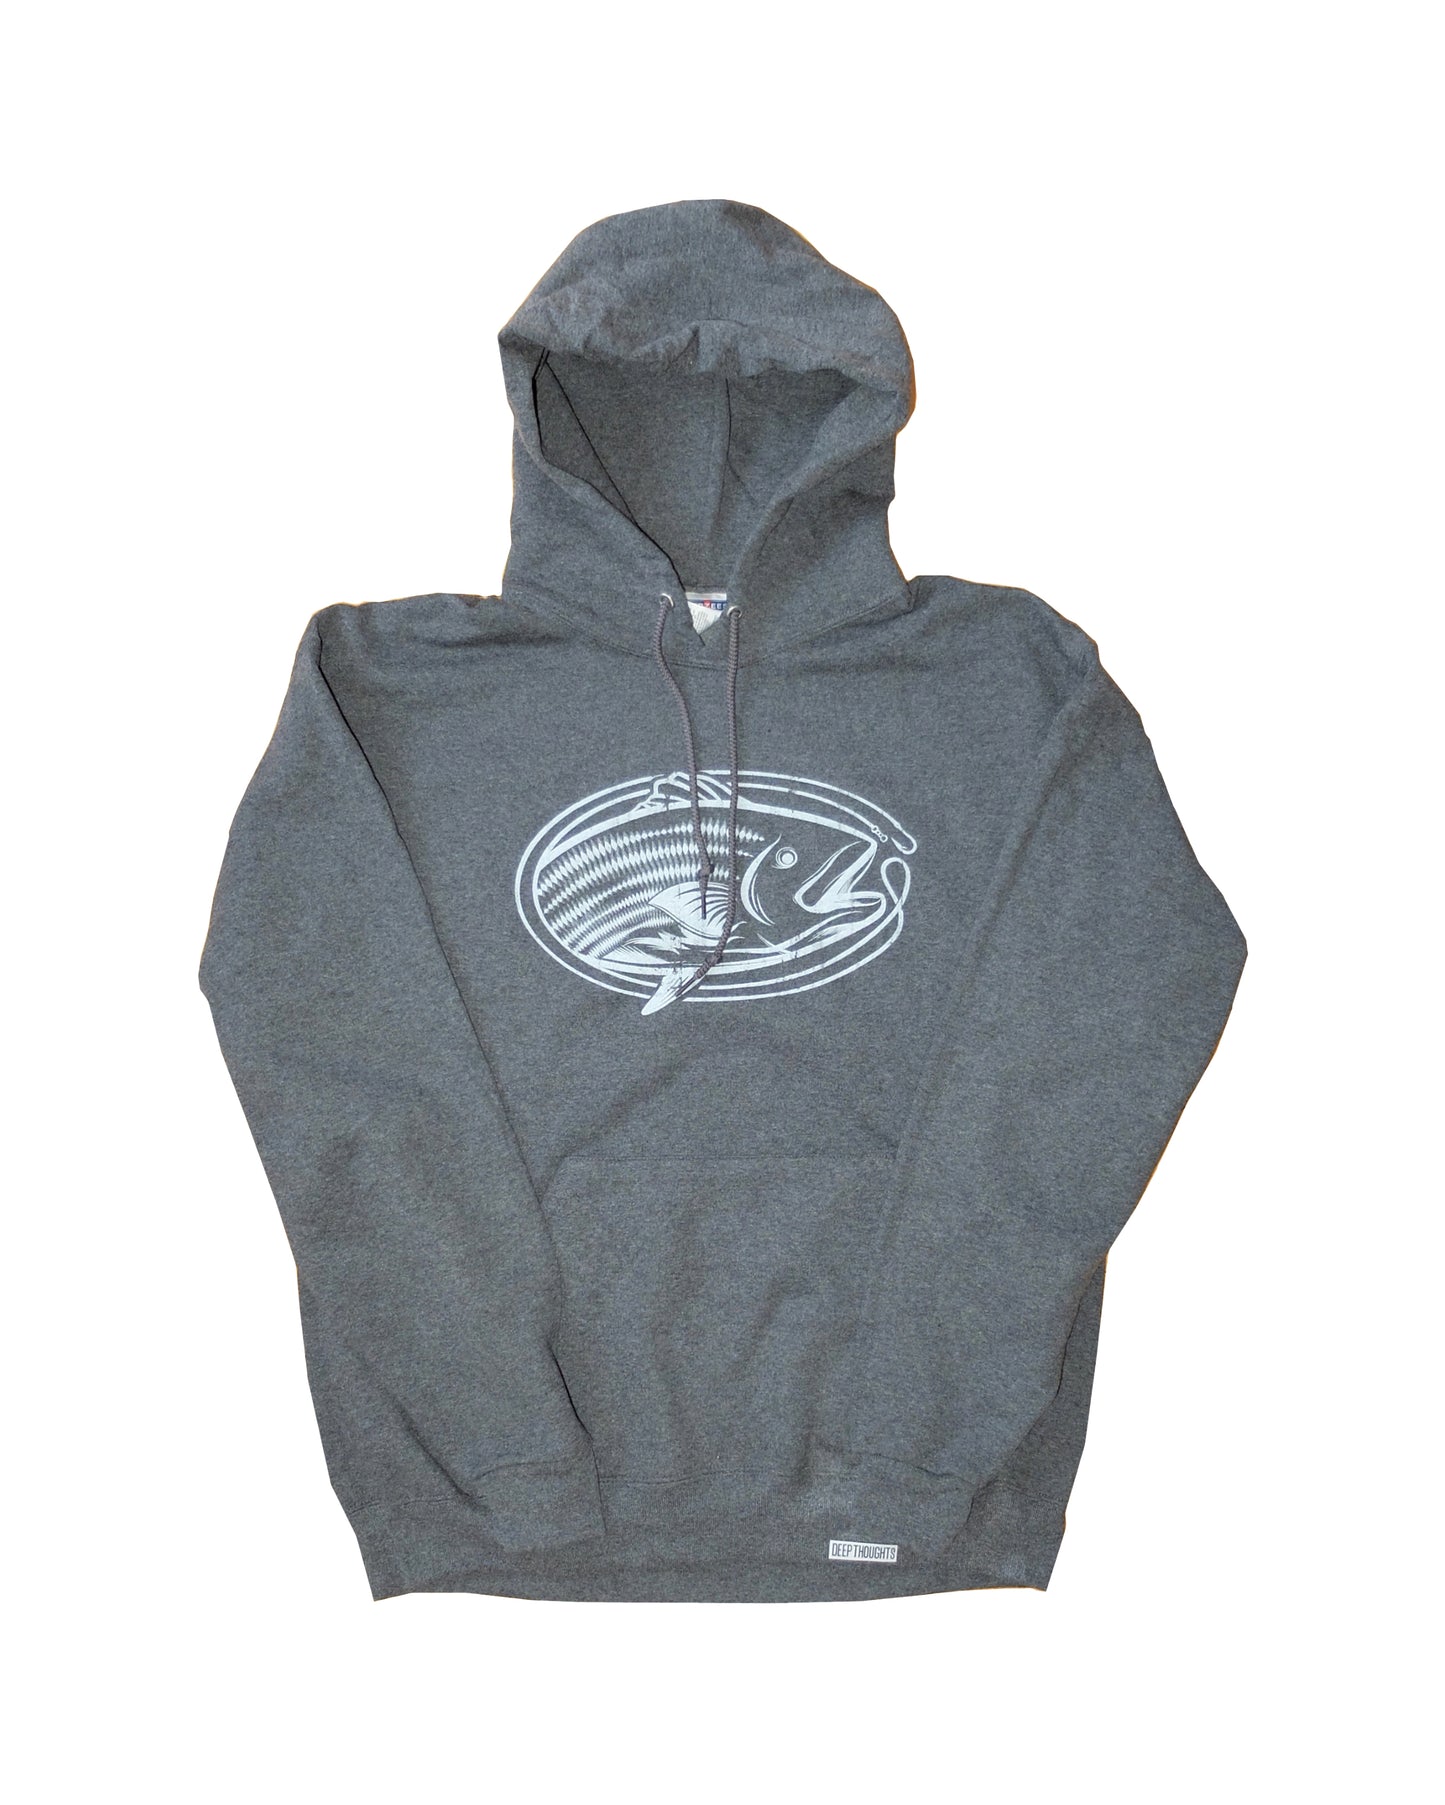 heather charcoal hoodie with white vintage style oval-shaped striped bass fishing graphic